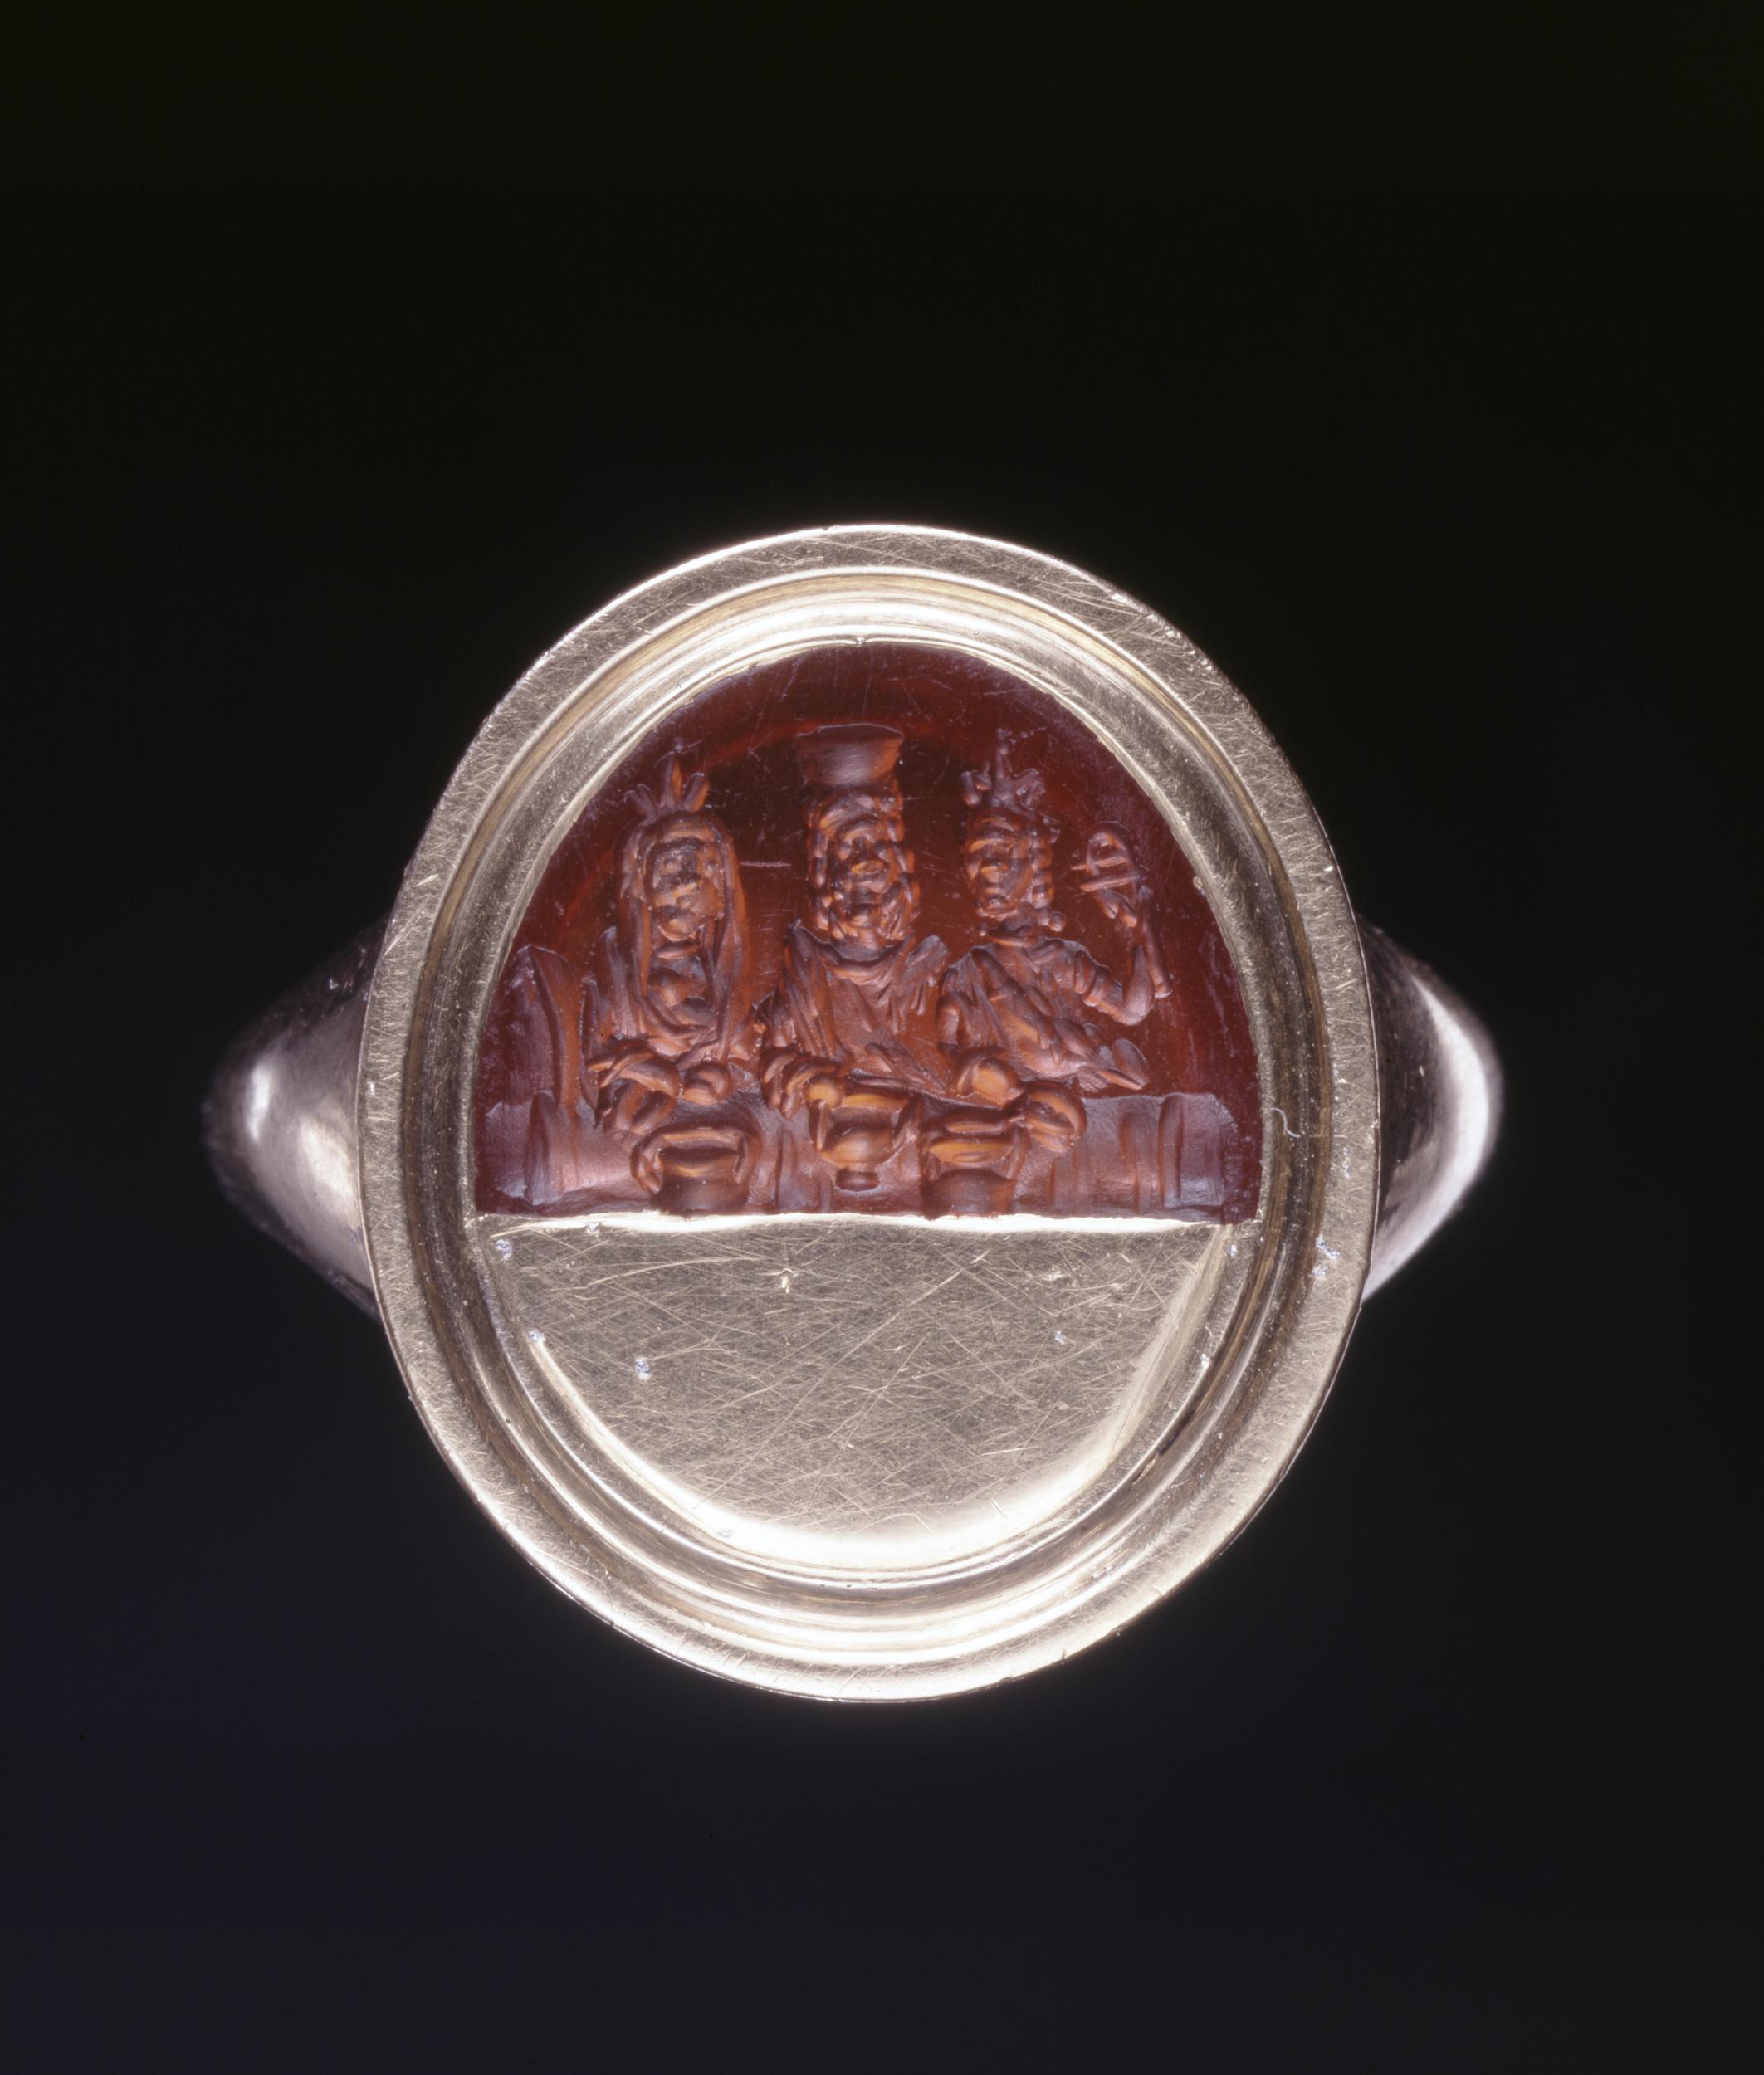 Upper part of Sard gem, which is similar to missing items (The Trustees of the British Museum/PA)